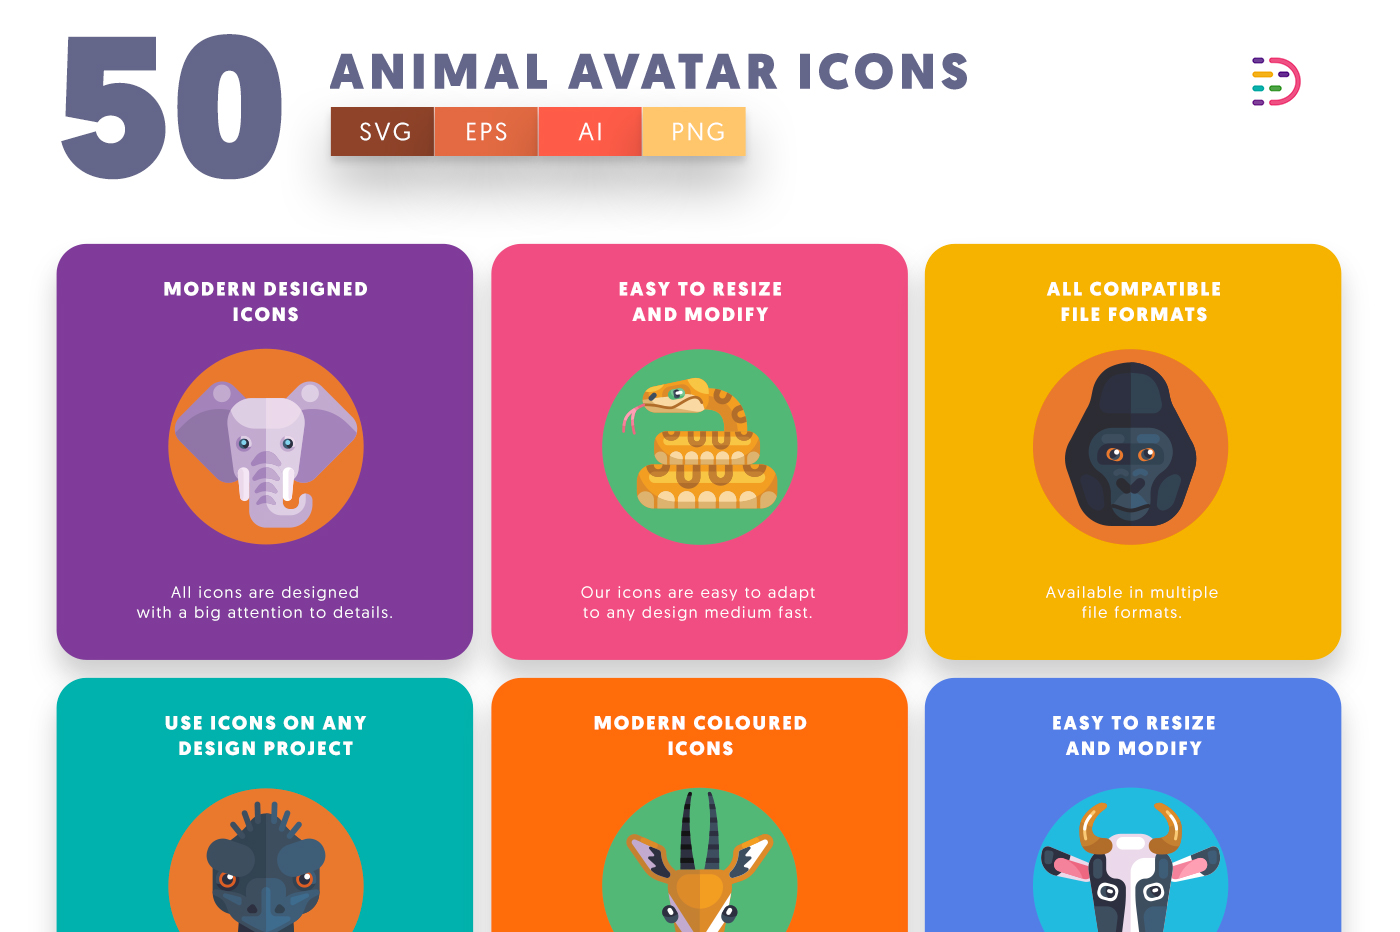 50 Animal Avatar Icons with colored backgrounds